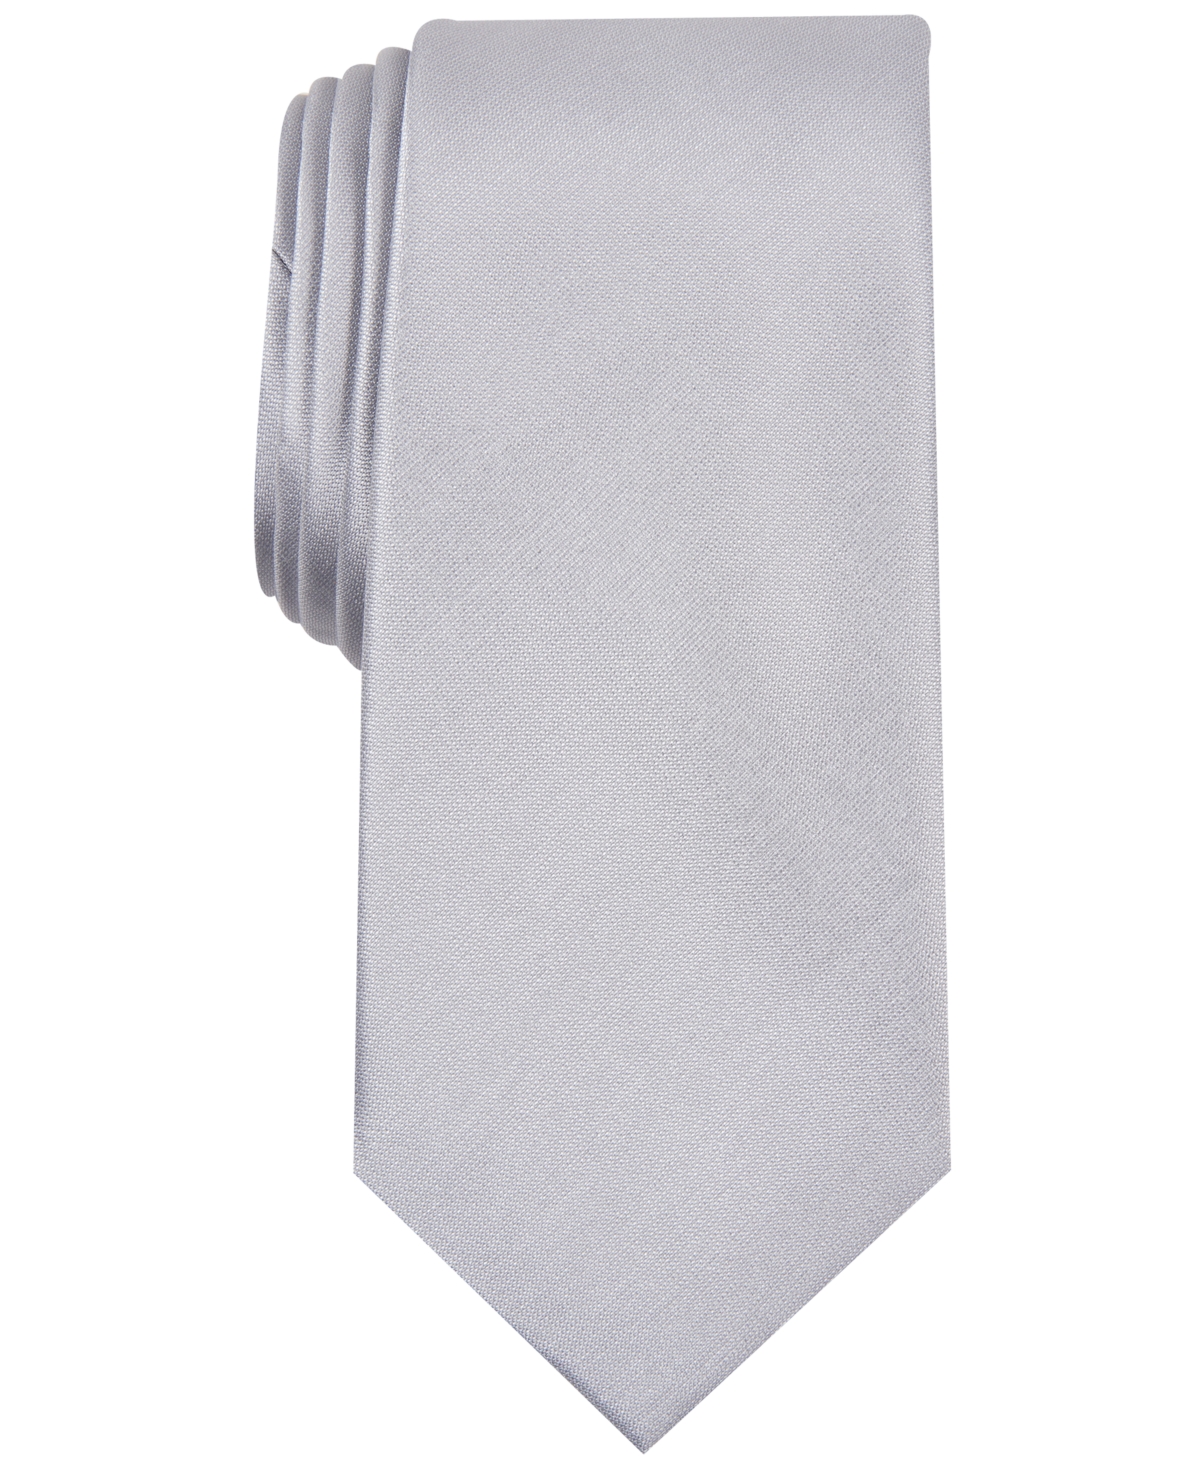 Men's Solid Texture Slim Tie, Created for Macy's - White